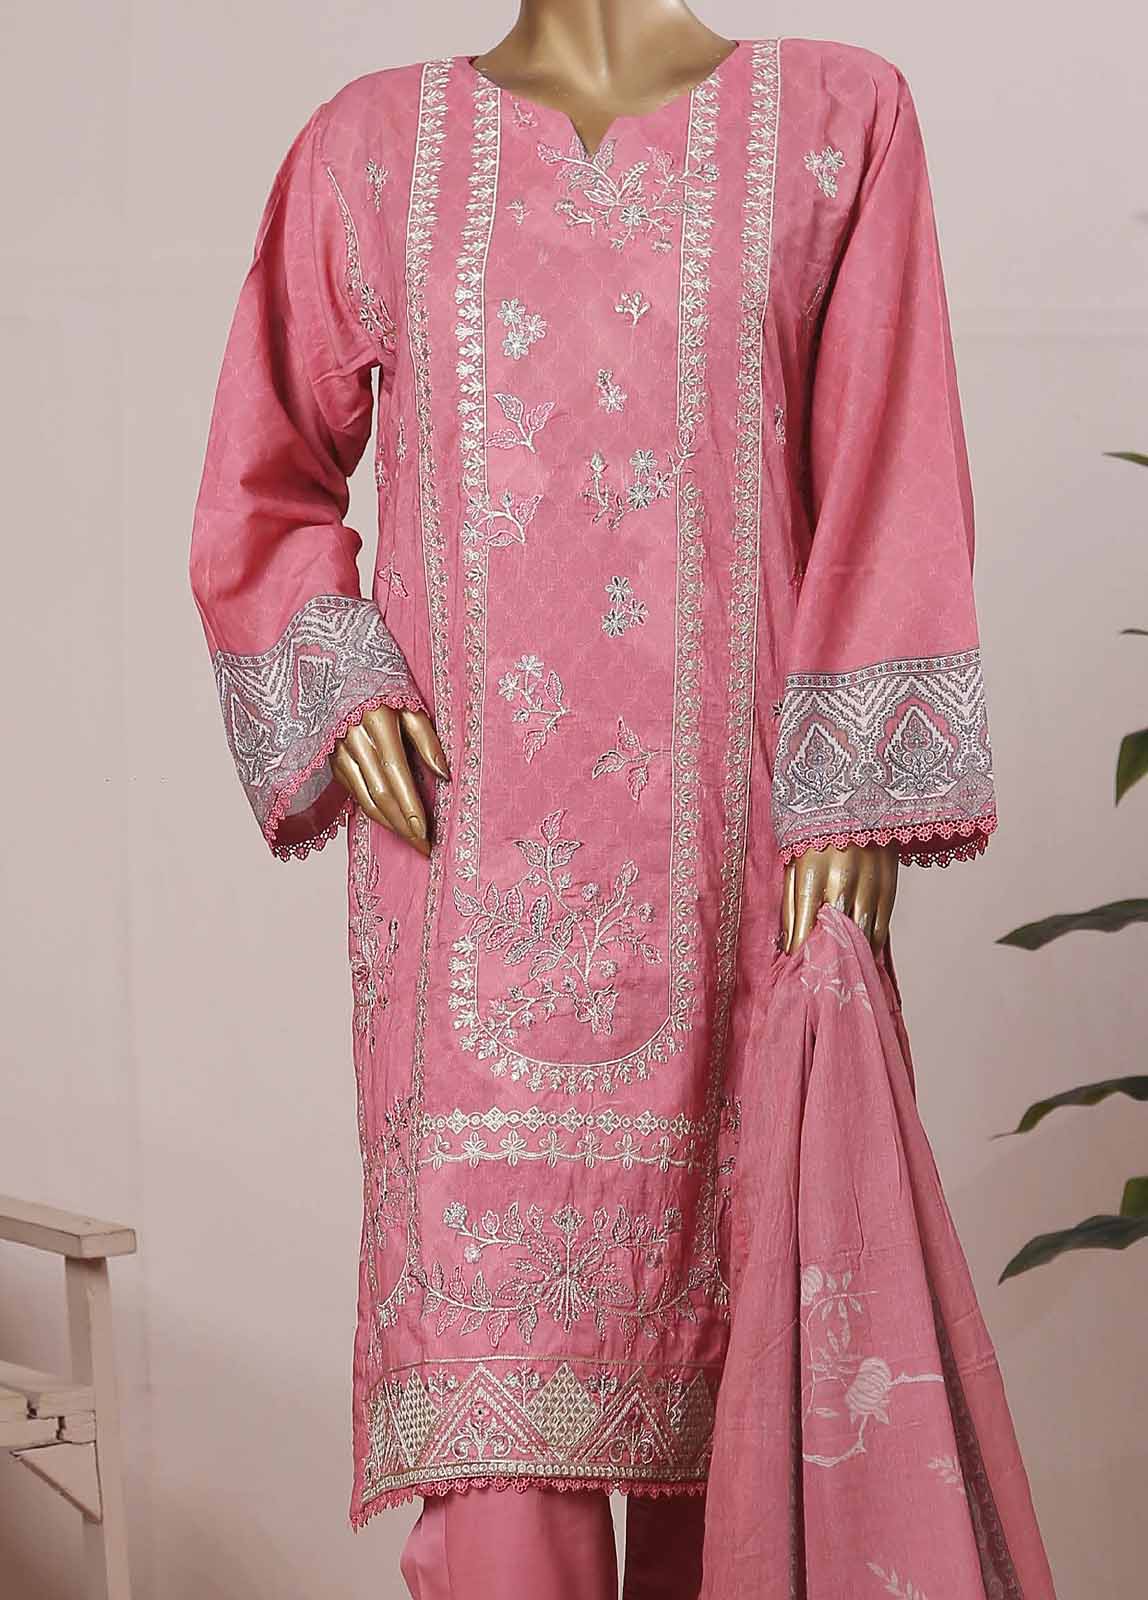 SMLE-0126- 3 Piece Embroidered Stitched Suit